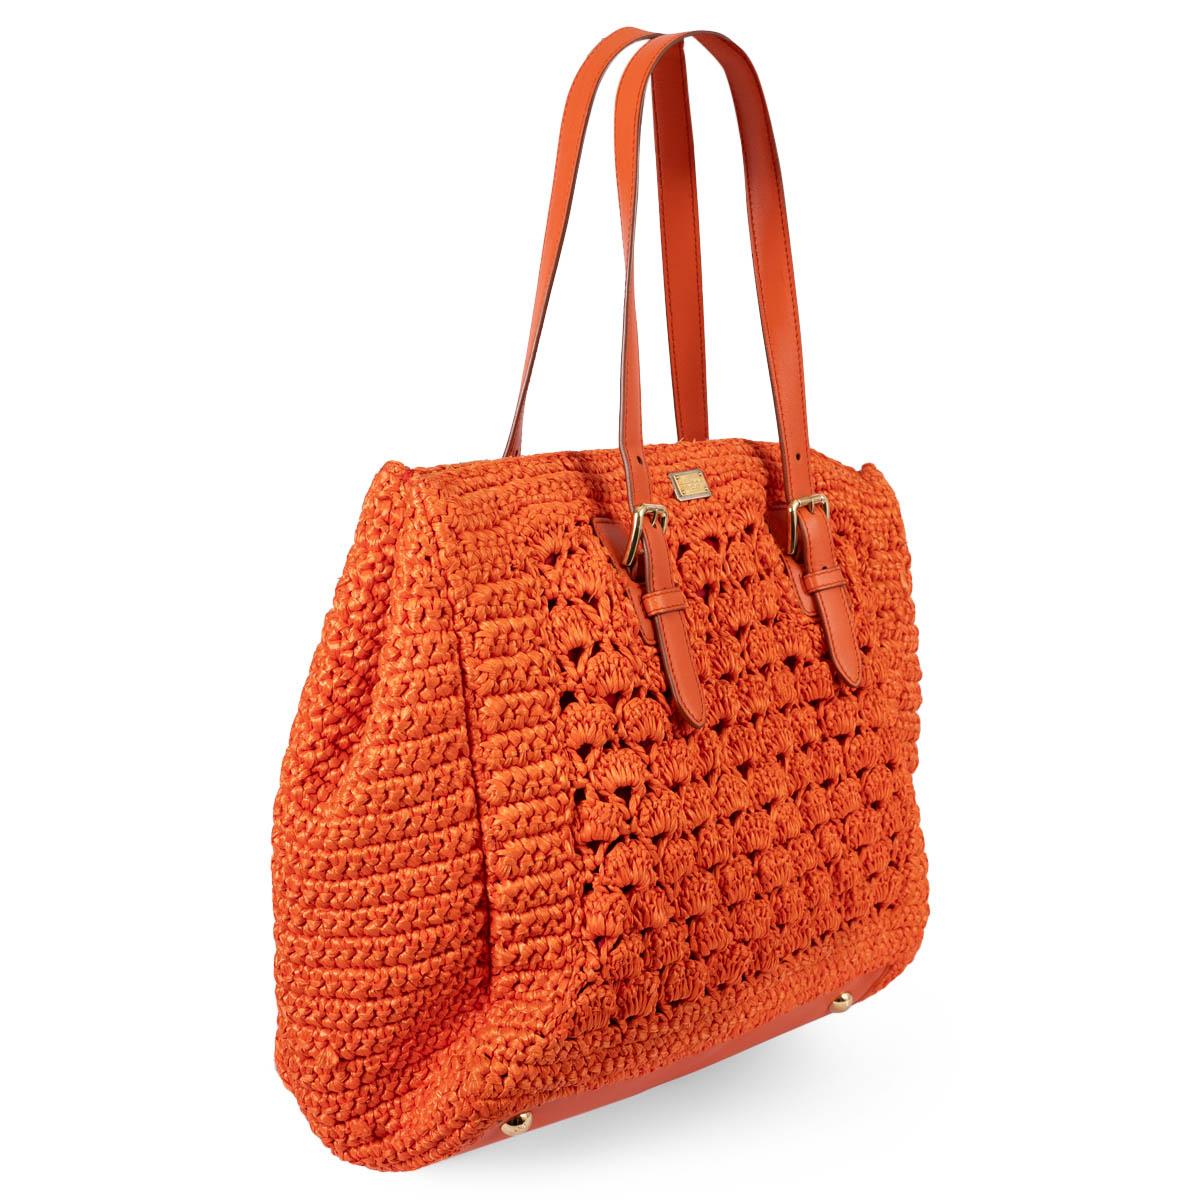 100% authentic Dolce & Gabbana Alma tote in orange Raffia crochet with gold-tone hardware. It features two top handles, a red fabric-lined interior with one zipper pocket against the back and two open pockets against the front. Has been carried and